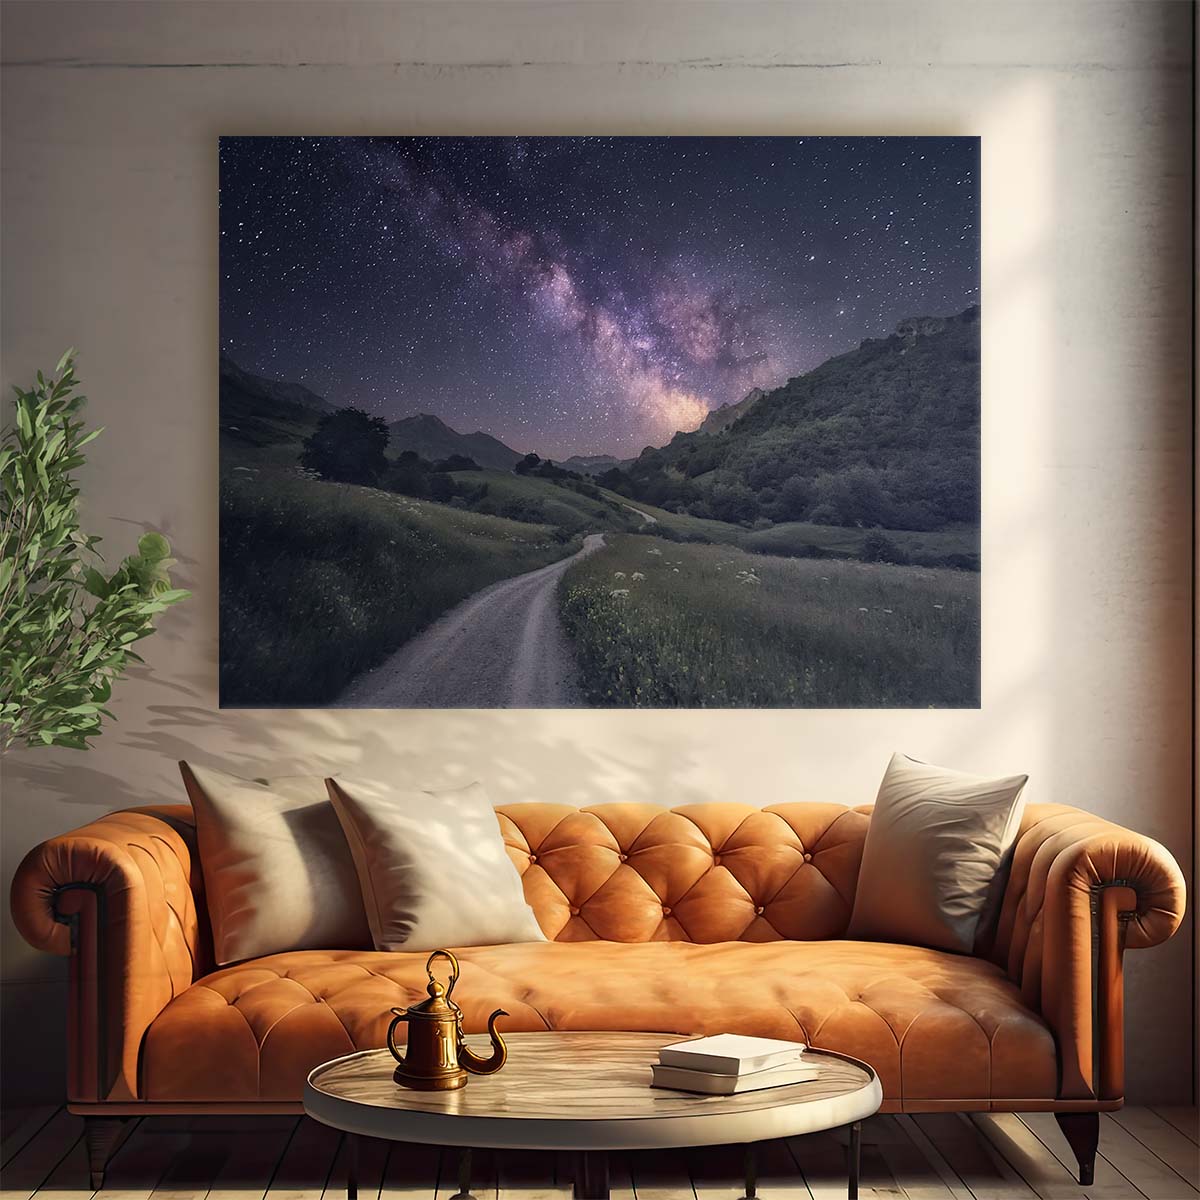 Starry Night Sky Over Asturias Mountains Wall Art by Luxuriance Designs. Made in USA.